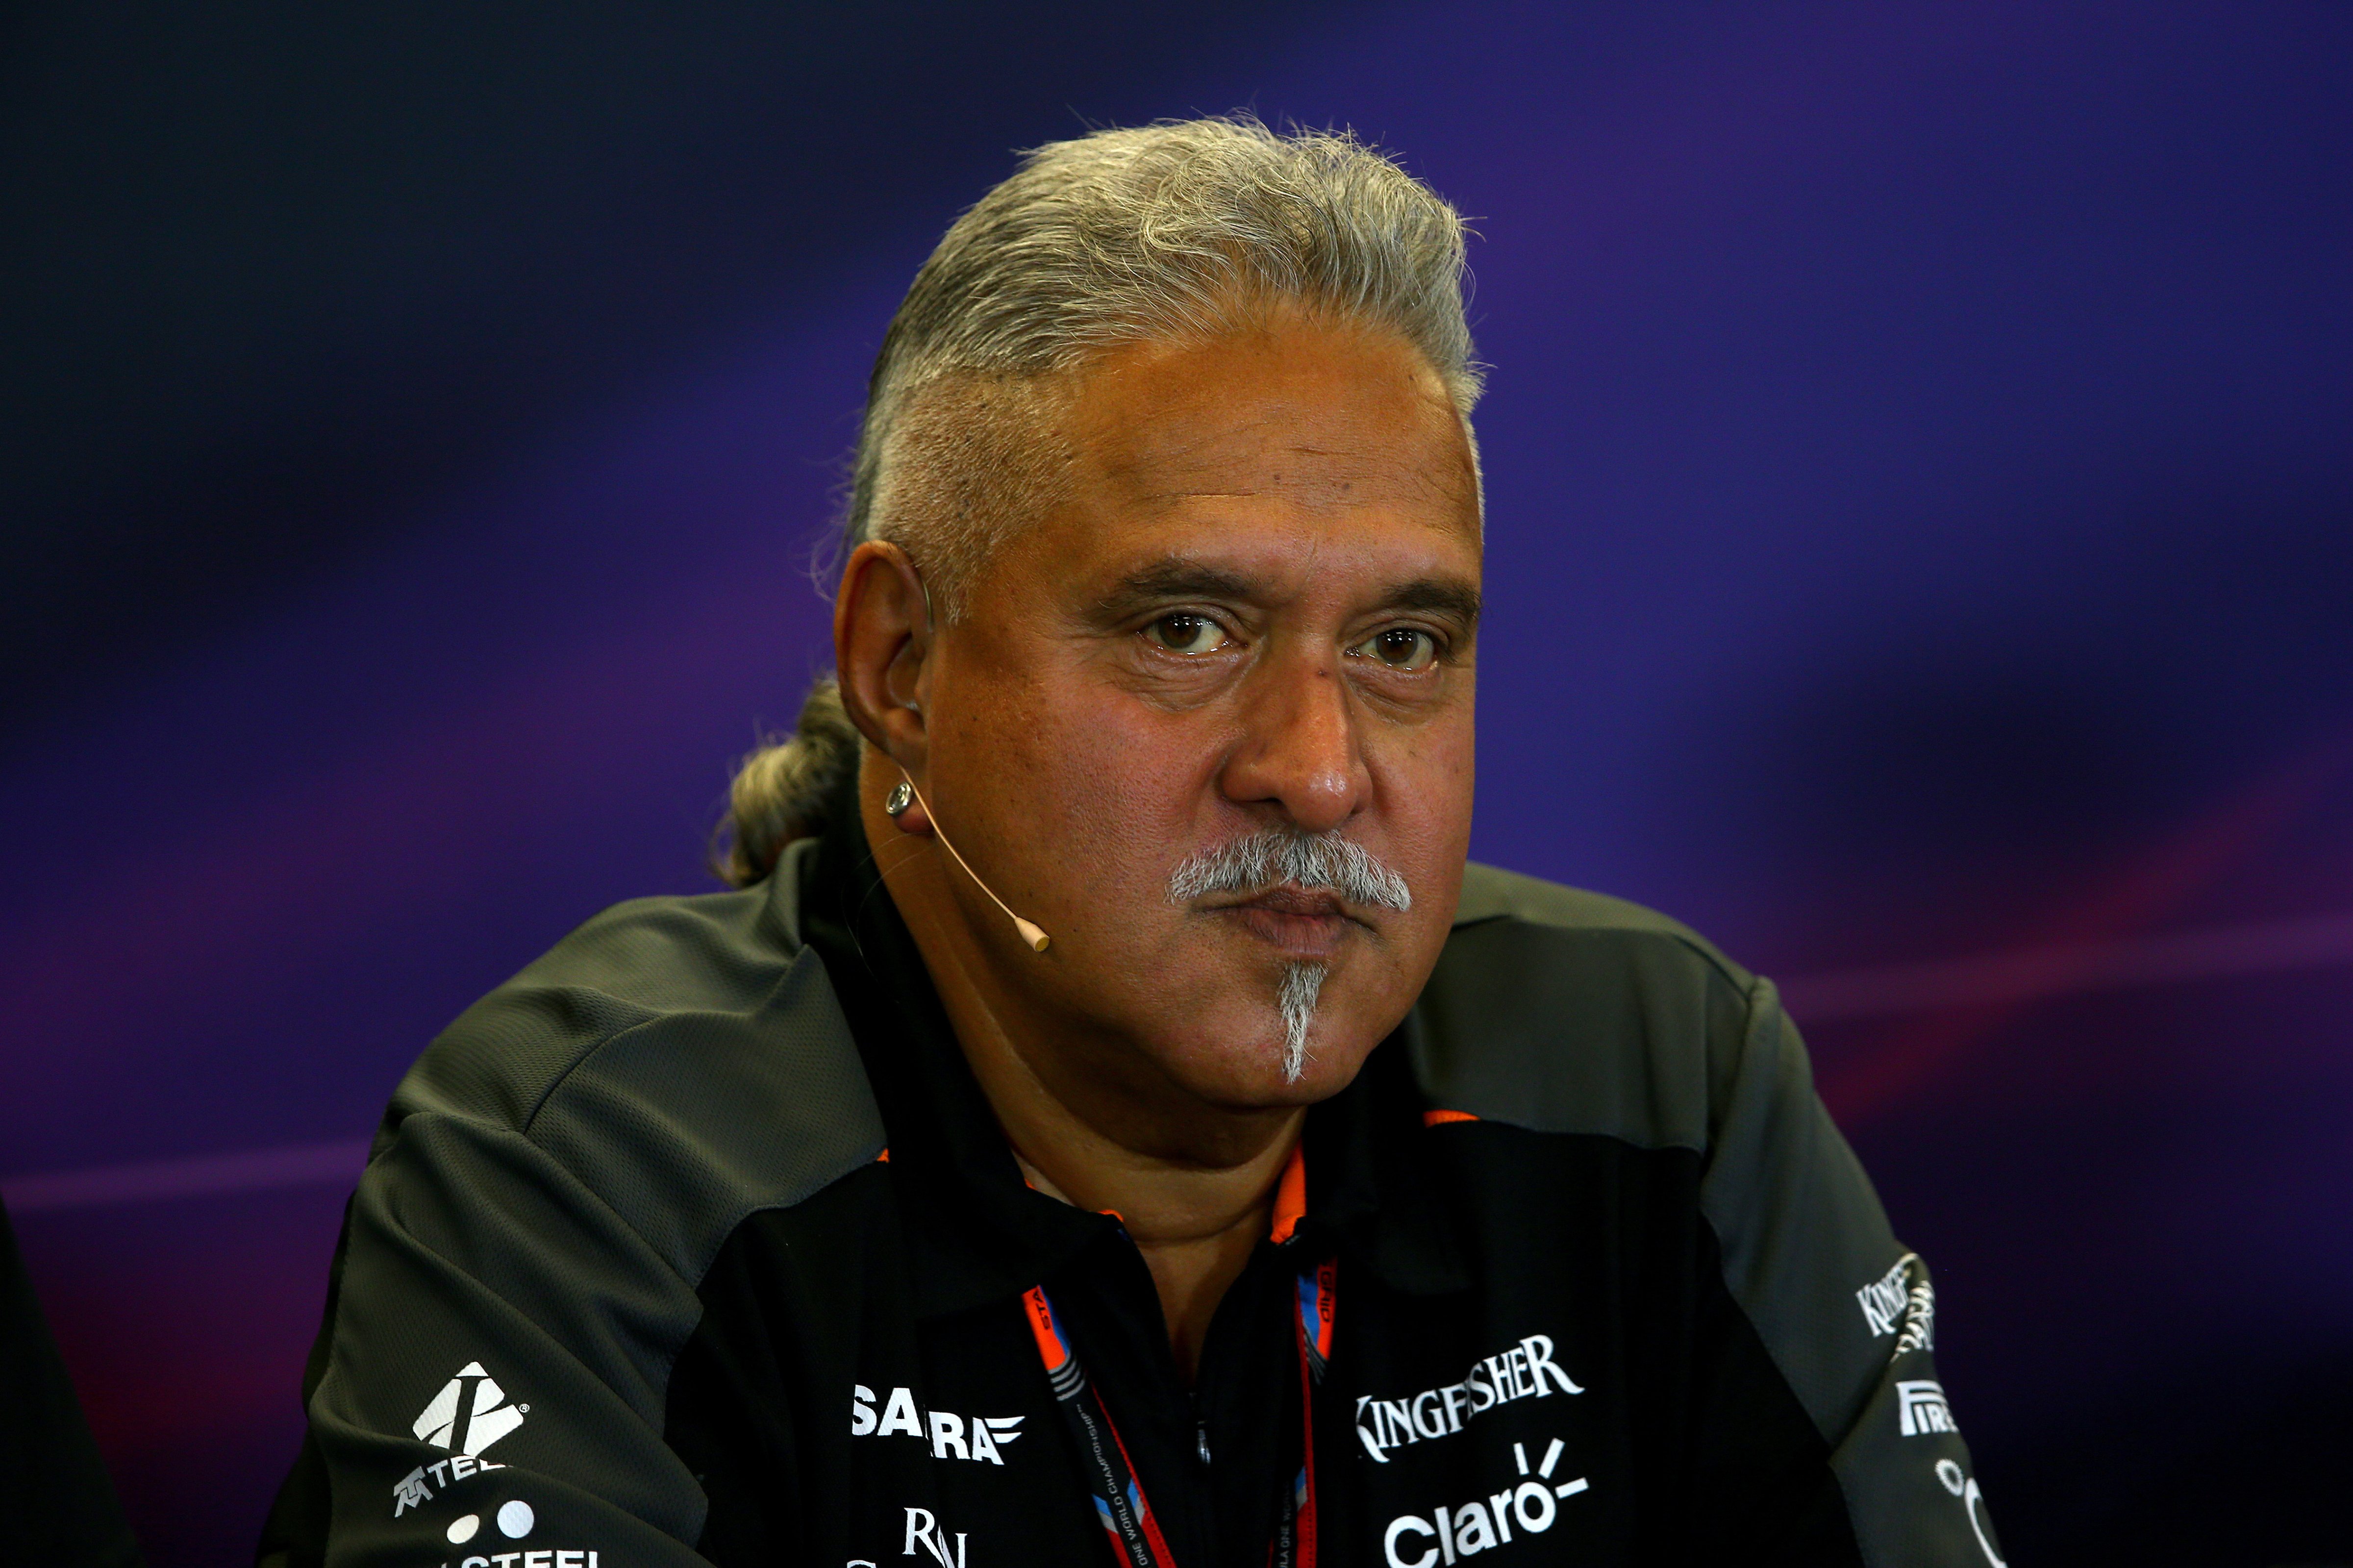 Vijay Mallya attends a press conference after practice for the U.S. Formula 1 Grand Prix at Circuit of the Americas on Oct. 23, 2015, in Austin (Mark Thompson—Getty Images)